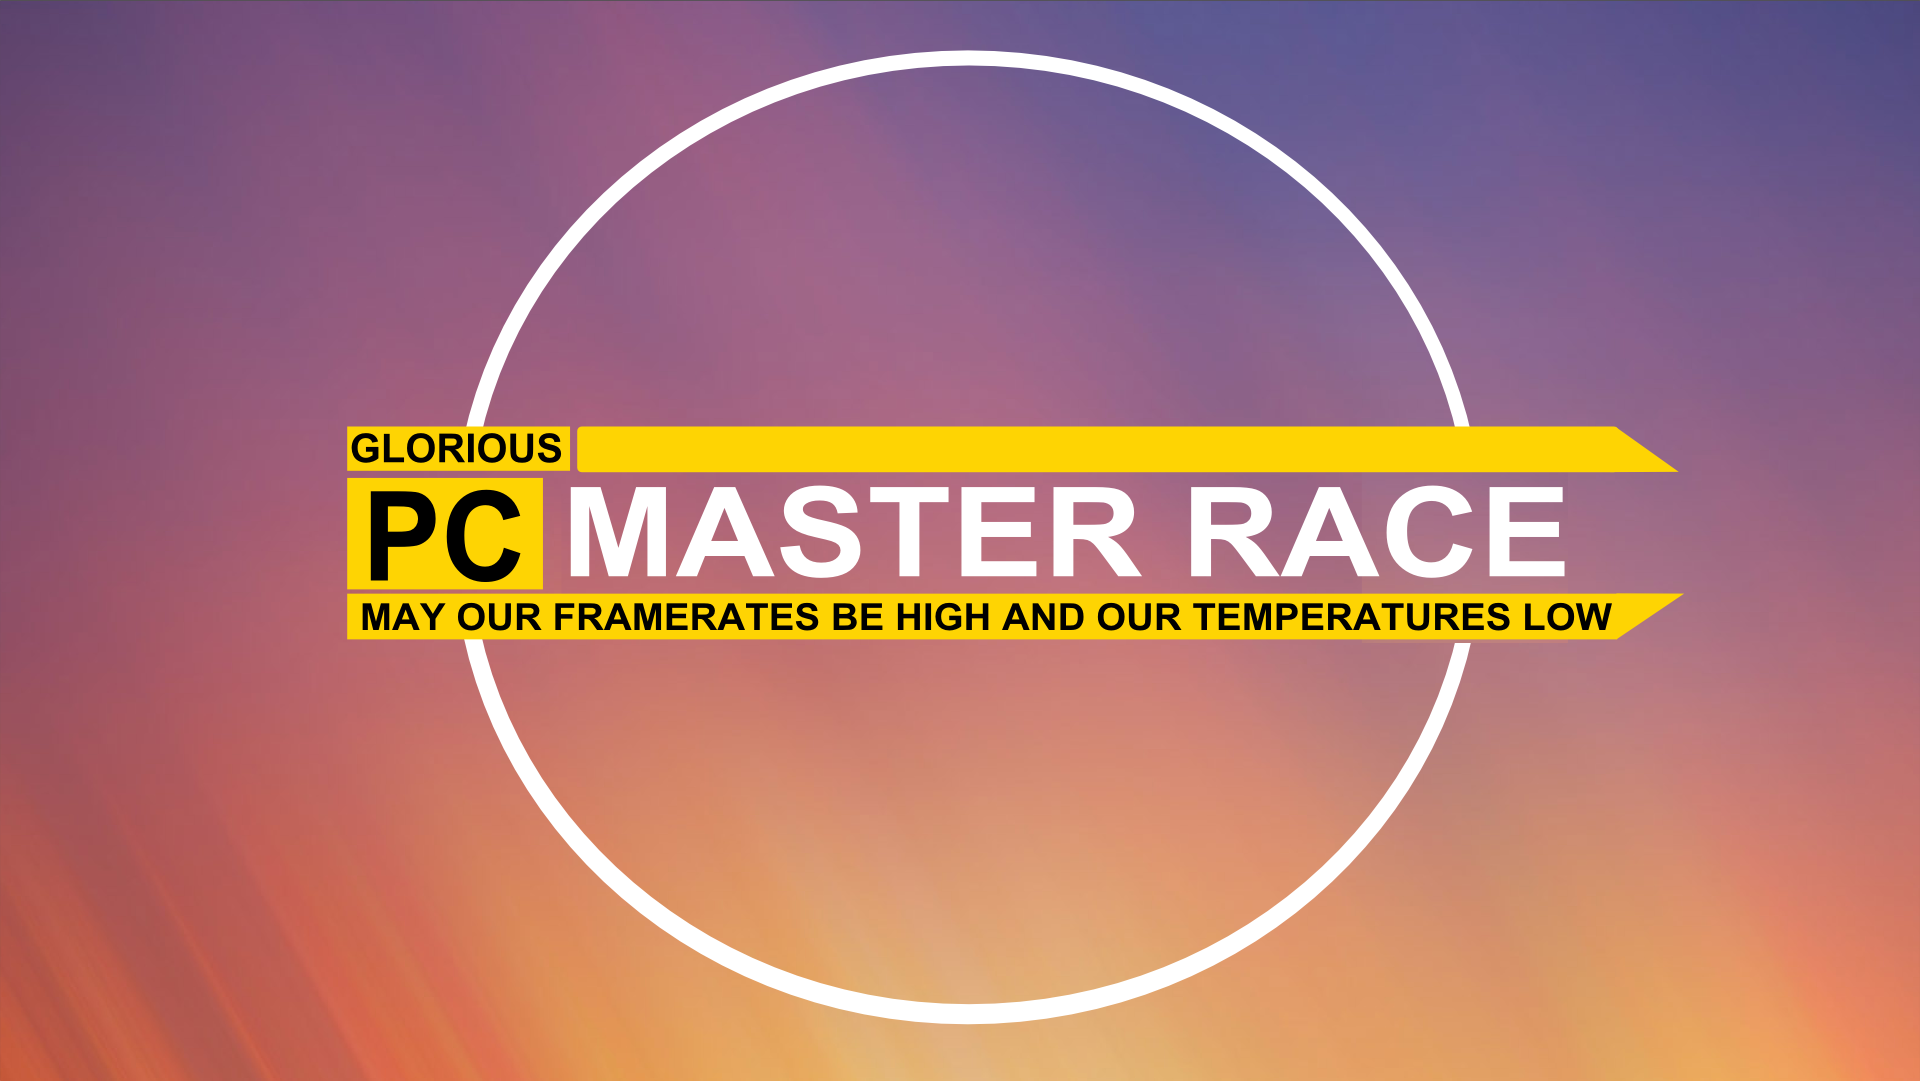 Pc Master Race Full HD Wallpaper And Background